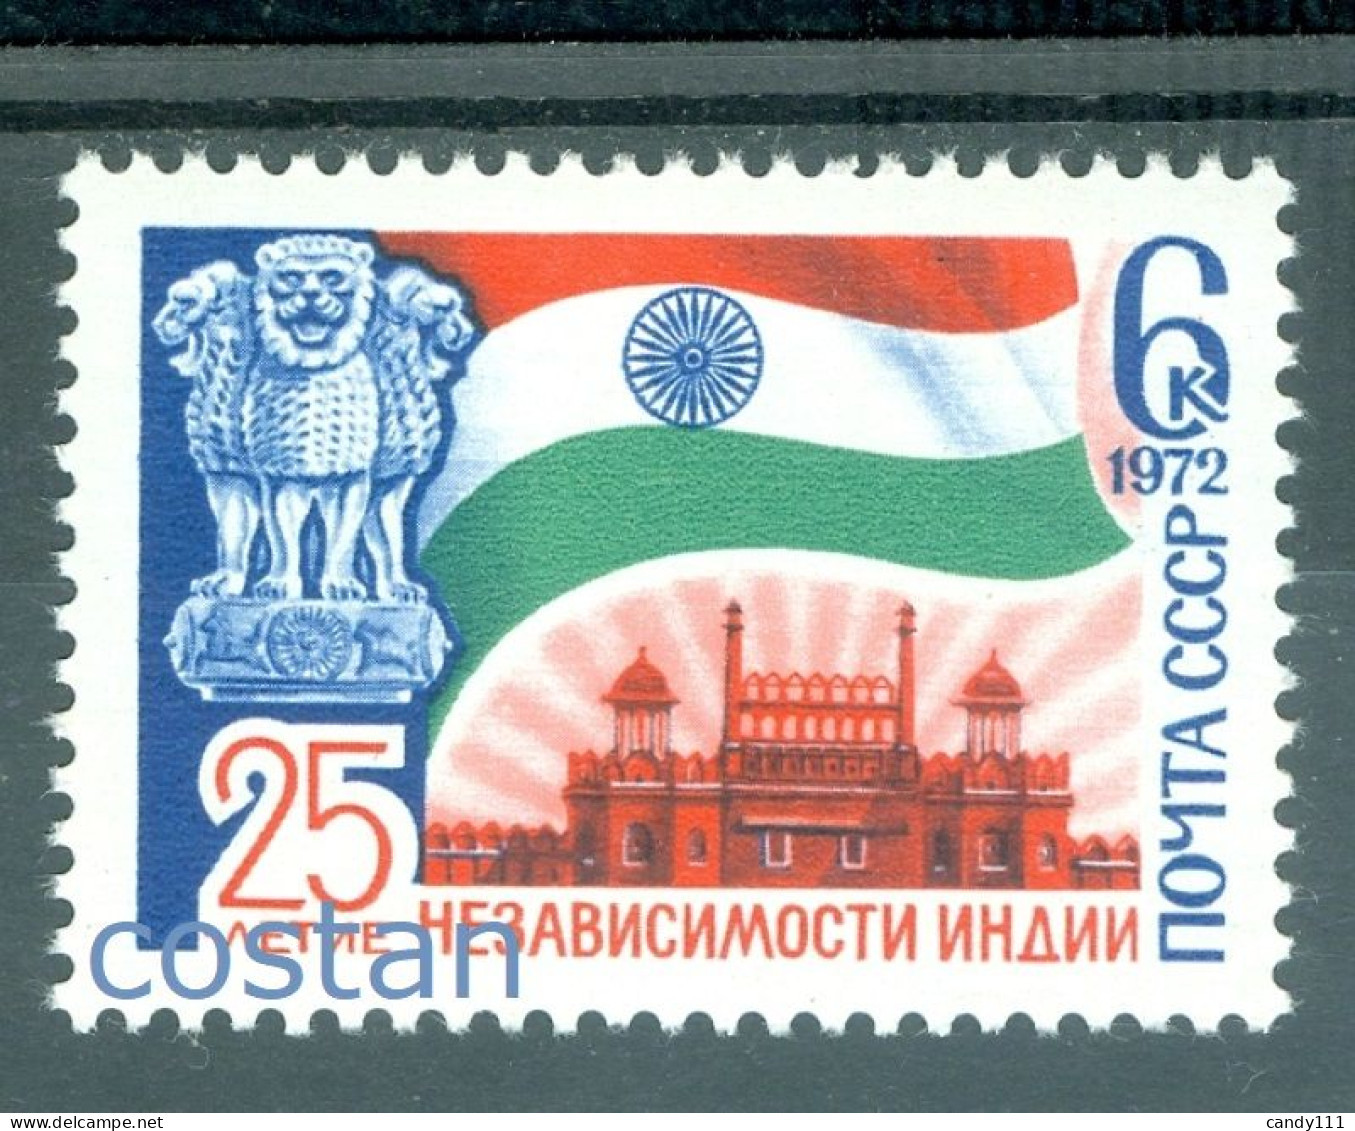 1972 INDIA Independence,Lion Capital,Flag,Red Fort/Lal Qila,Delhi,Russia,4031MNH - Castles